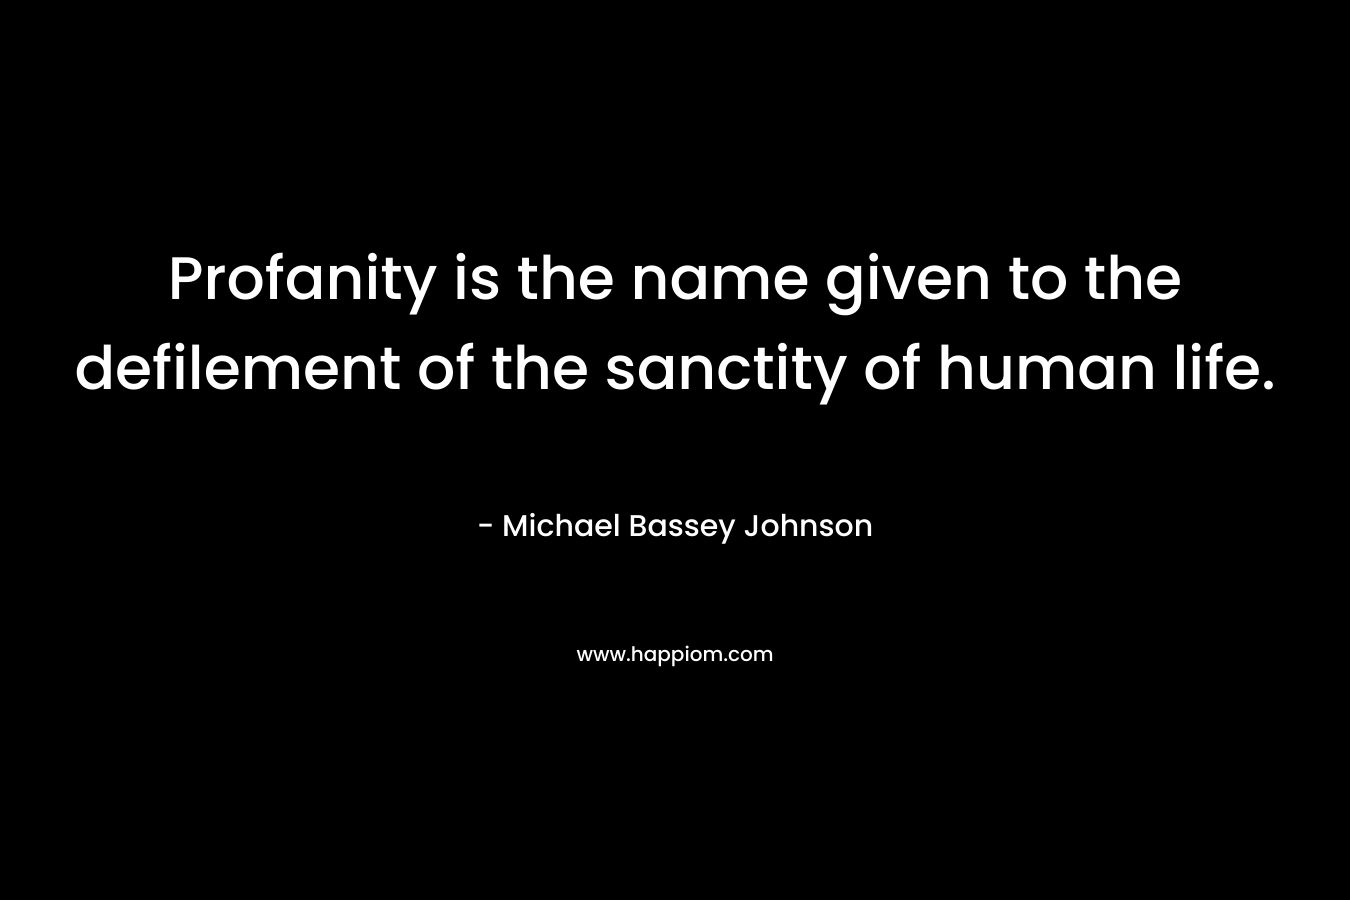 Profanity is the name given to the defilement of the sanctity of human life. – Michael Bassey Johnson